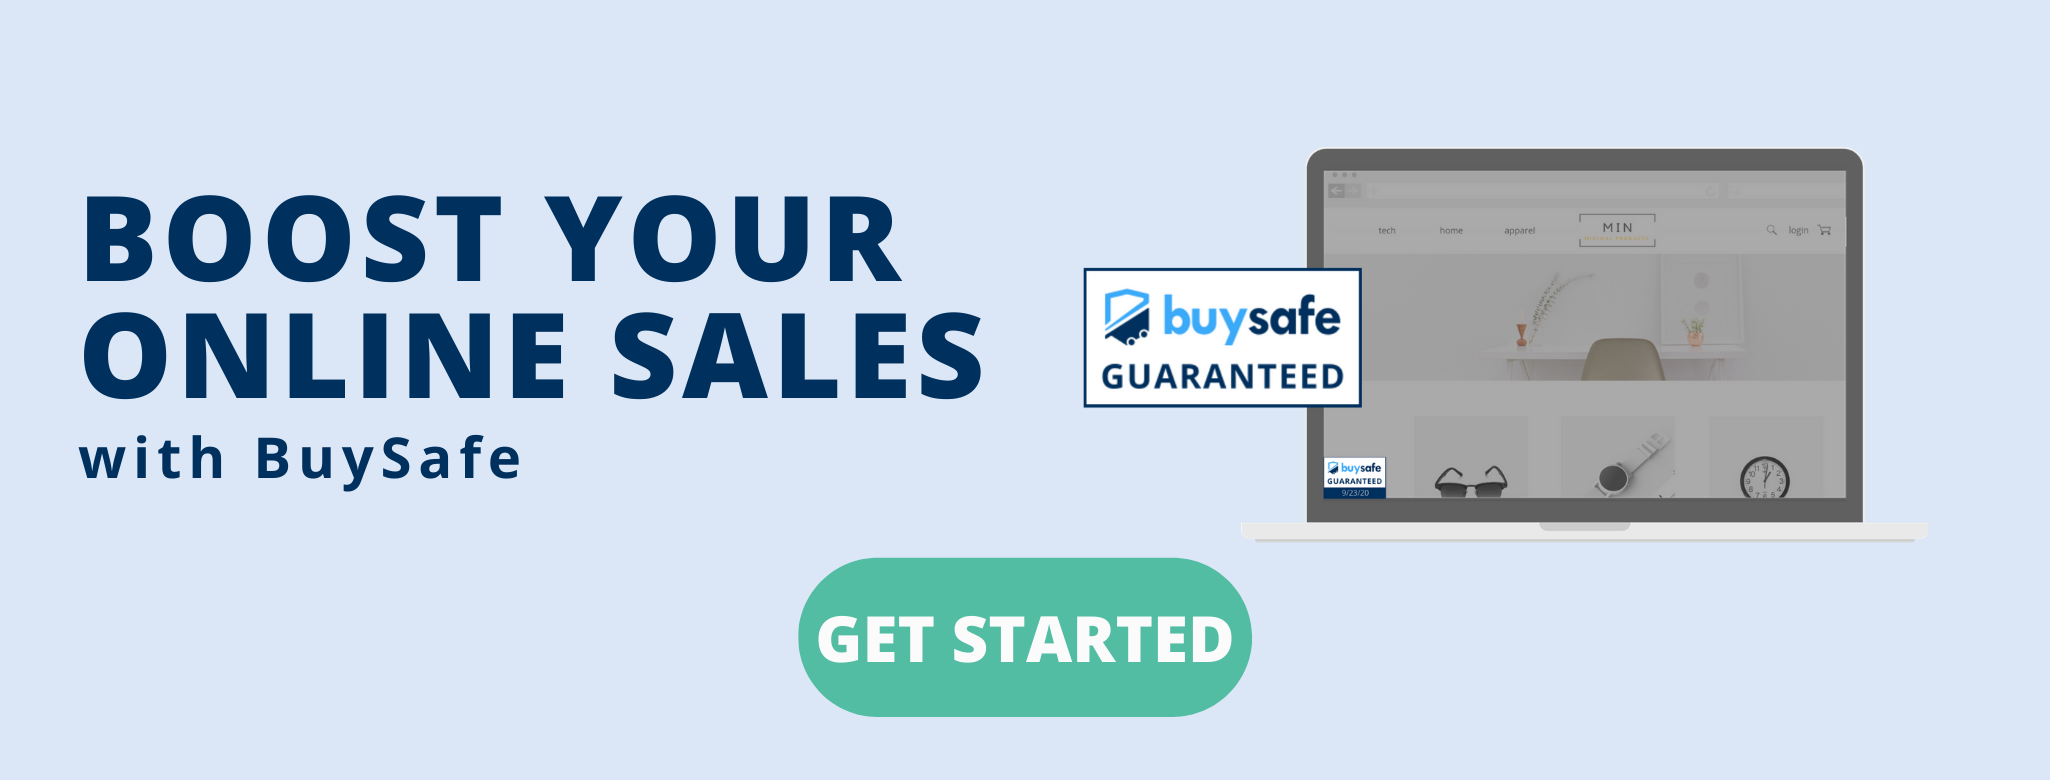 Get started with BuySafe to boost your online sales today